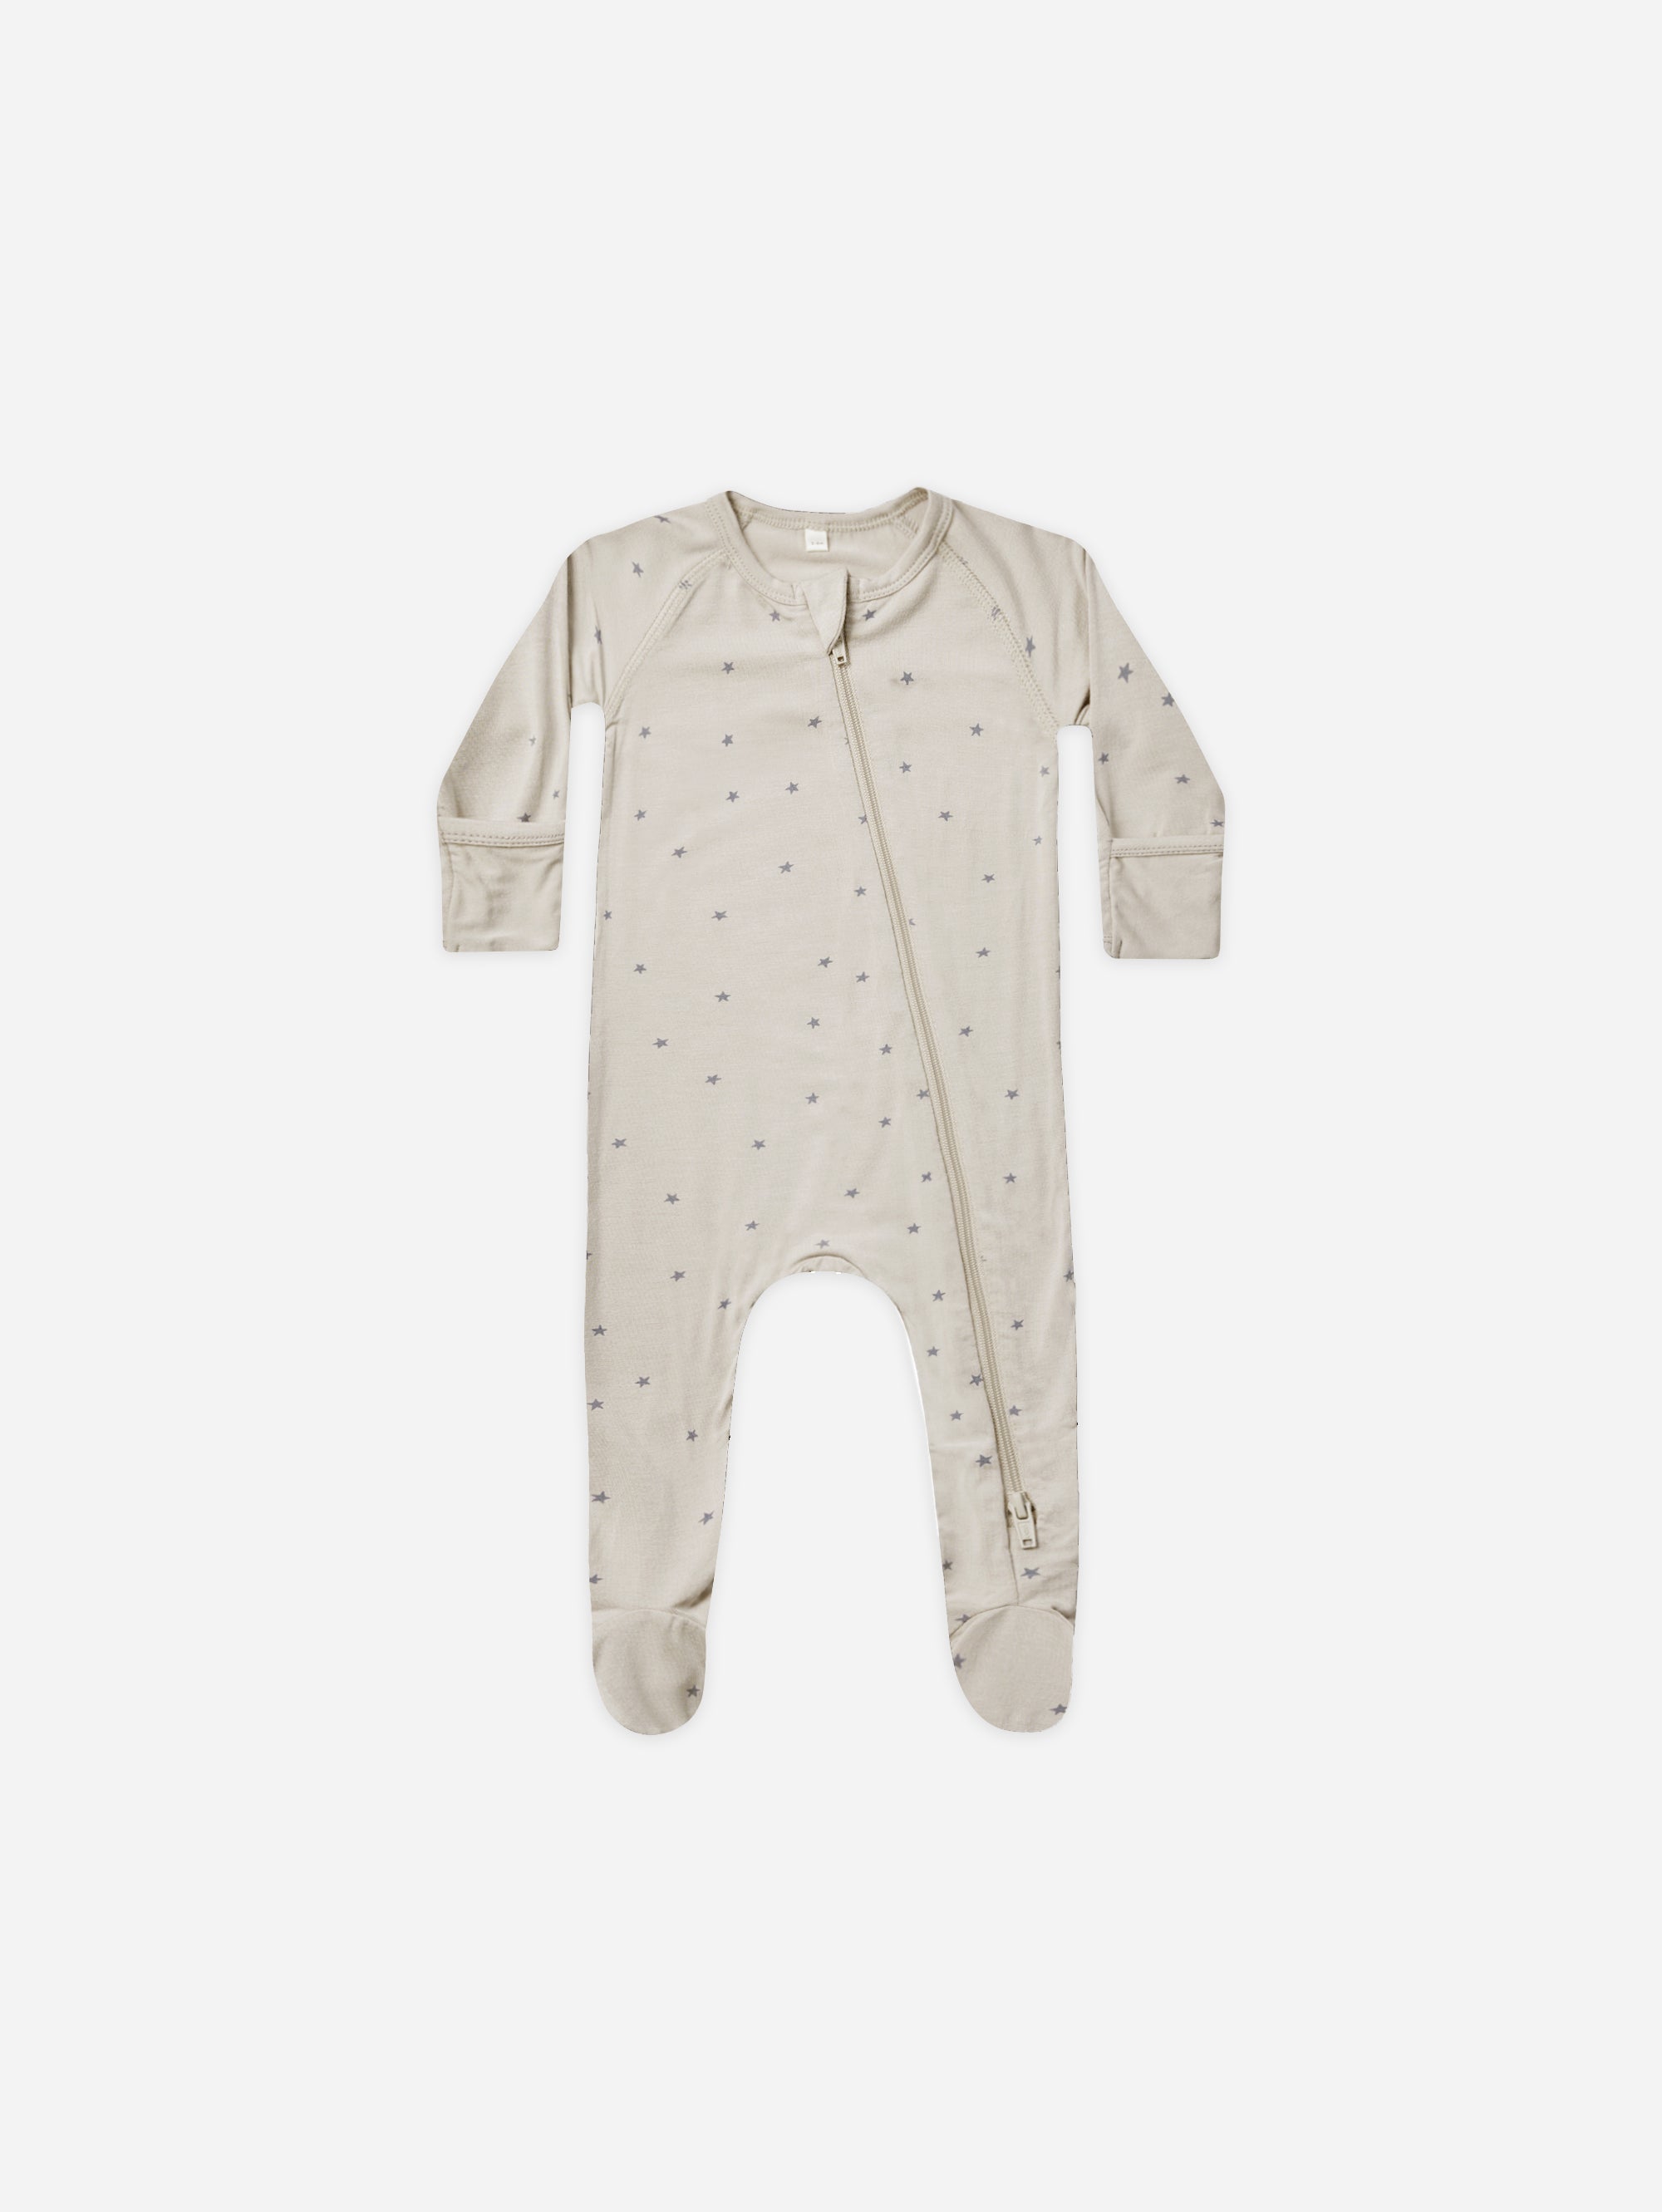 Bamboo Zip Footie || Stars - Rylee + Cru | Kids Clothes | Trendy Baby Clothes | Modern Infant Outfits |